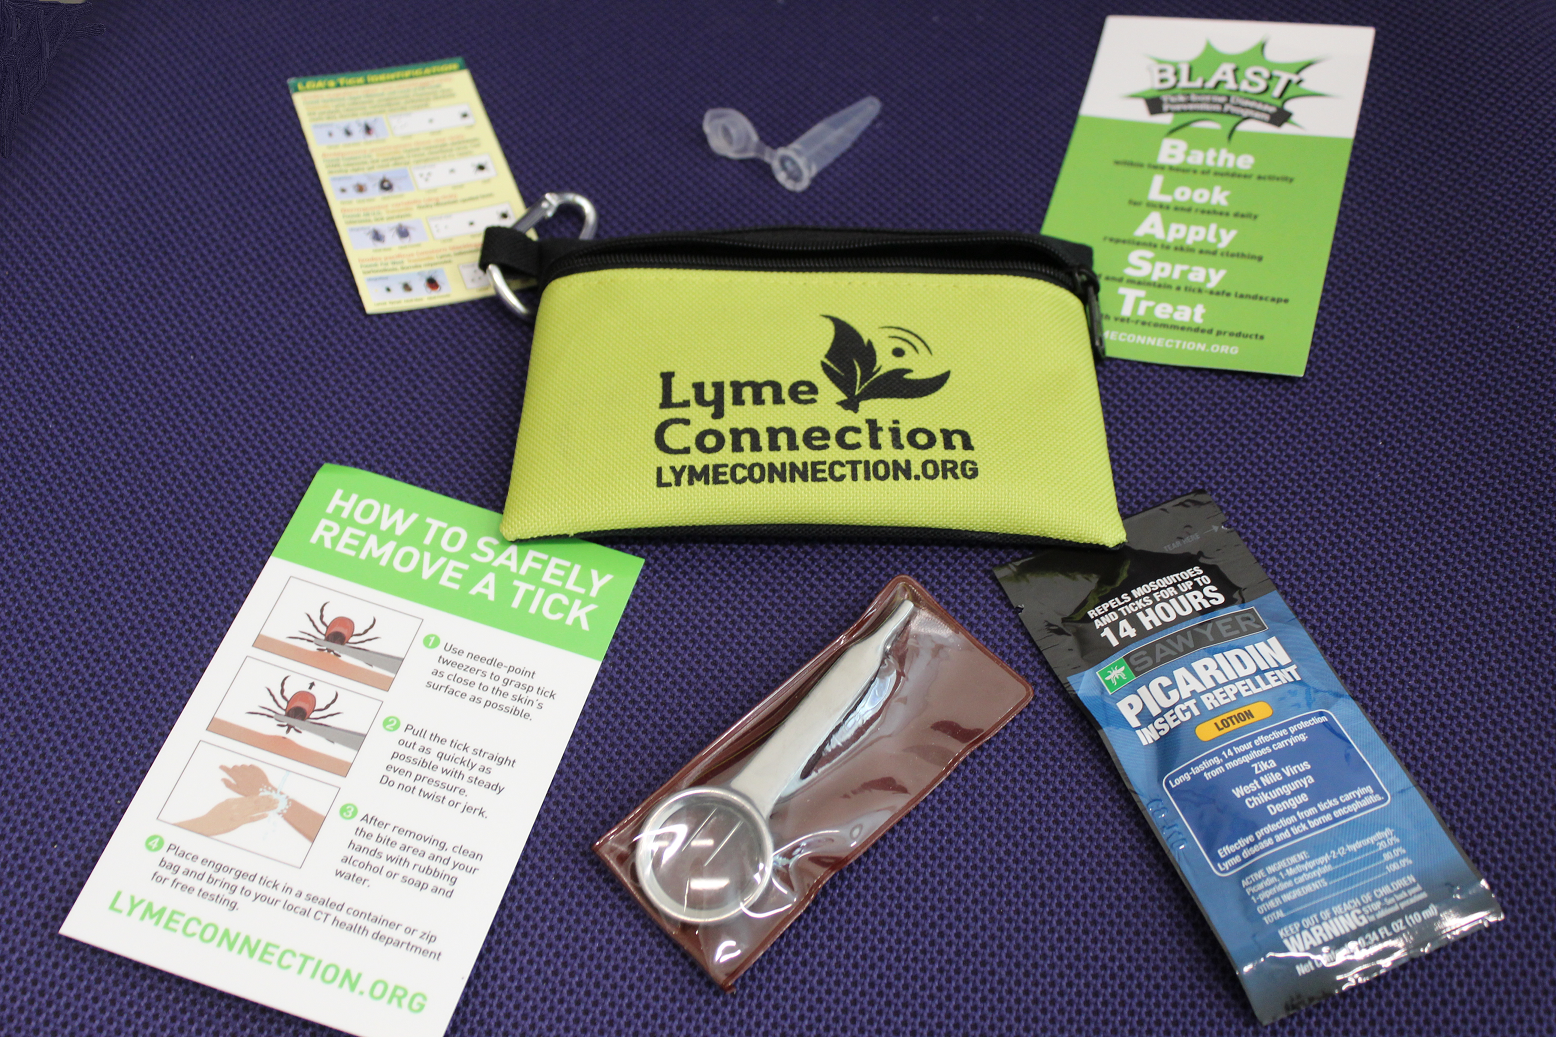 A lime-green pouch with the Lyme Connection logo, containing insect repellant, needle-point tweezers with a magnifying glass, a tick identification guide, a guide to safely removing a tick, a magnet with the BLAST protocol and a specimen vial to collect ticks.